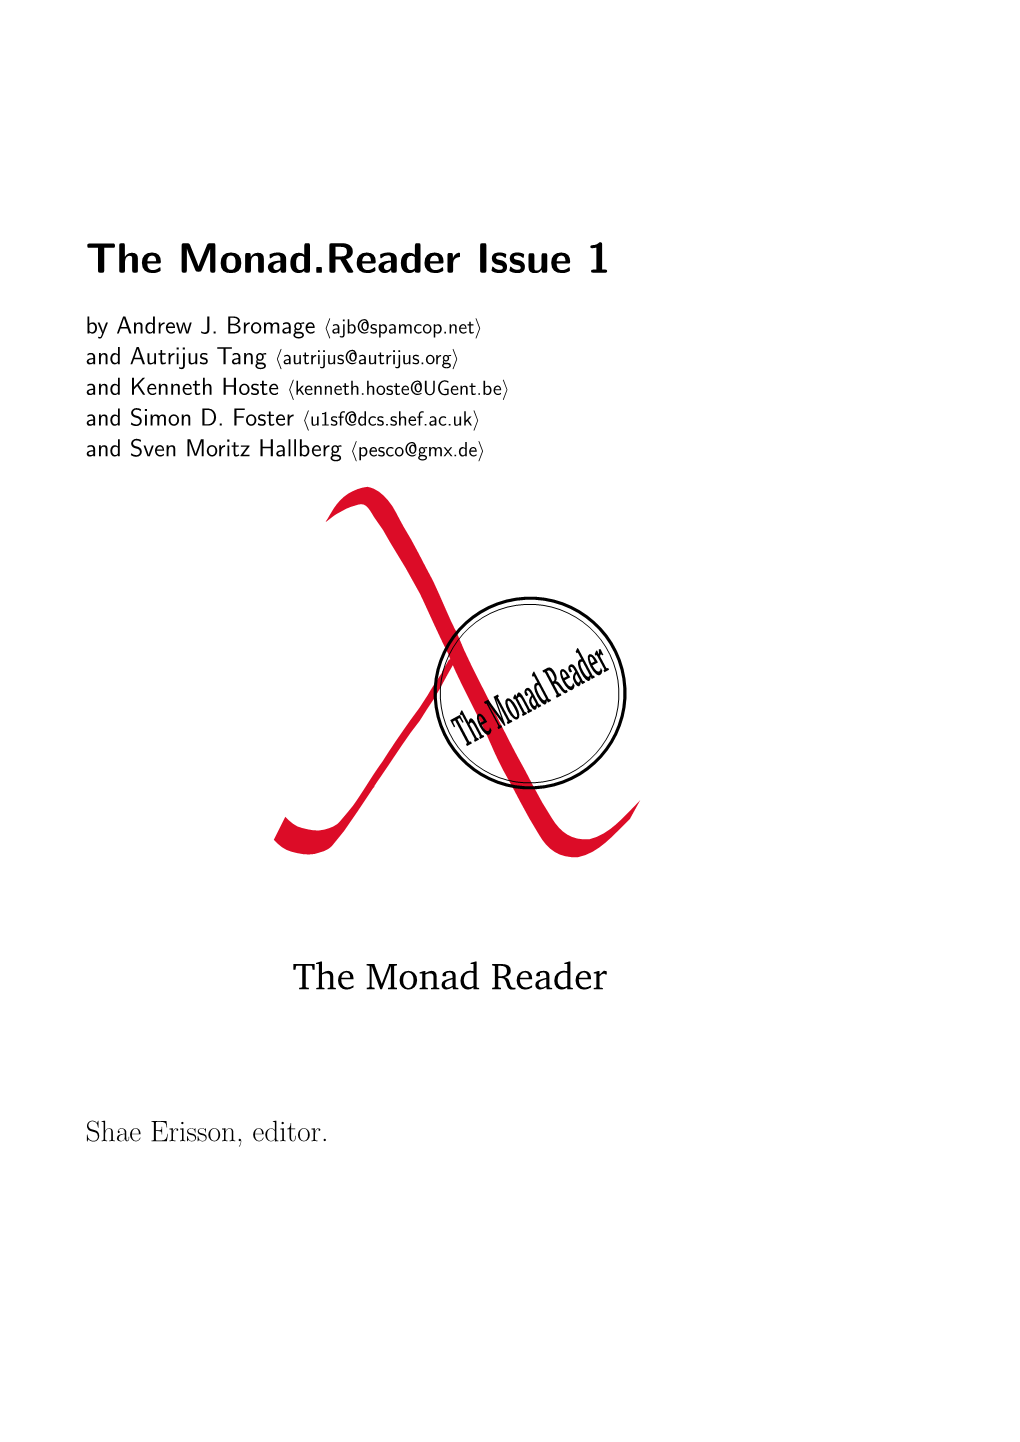 The Monad.Reader Issue 1 by Andrew J